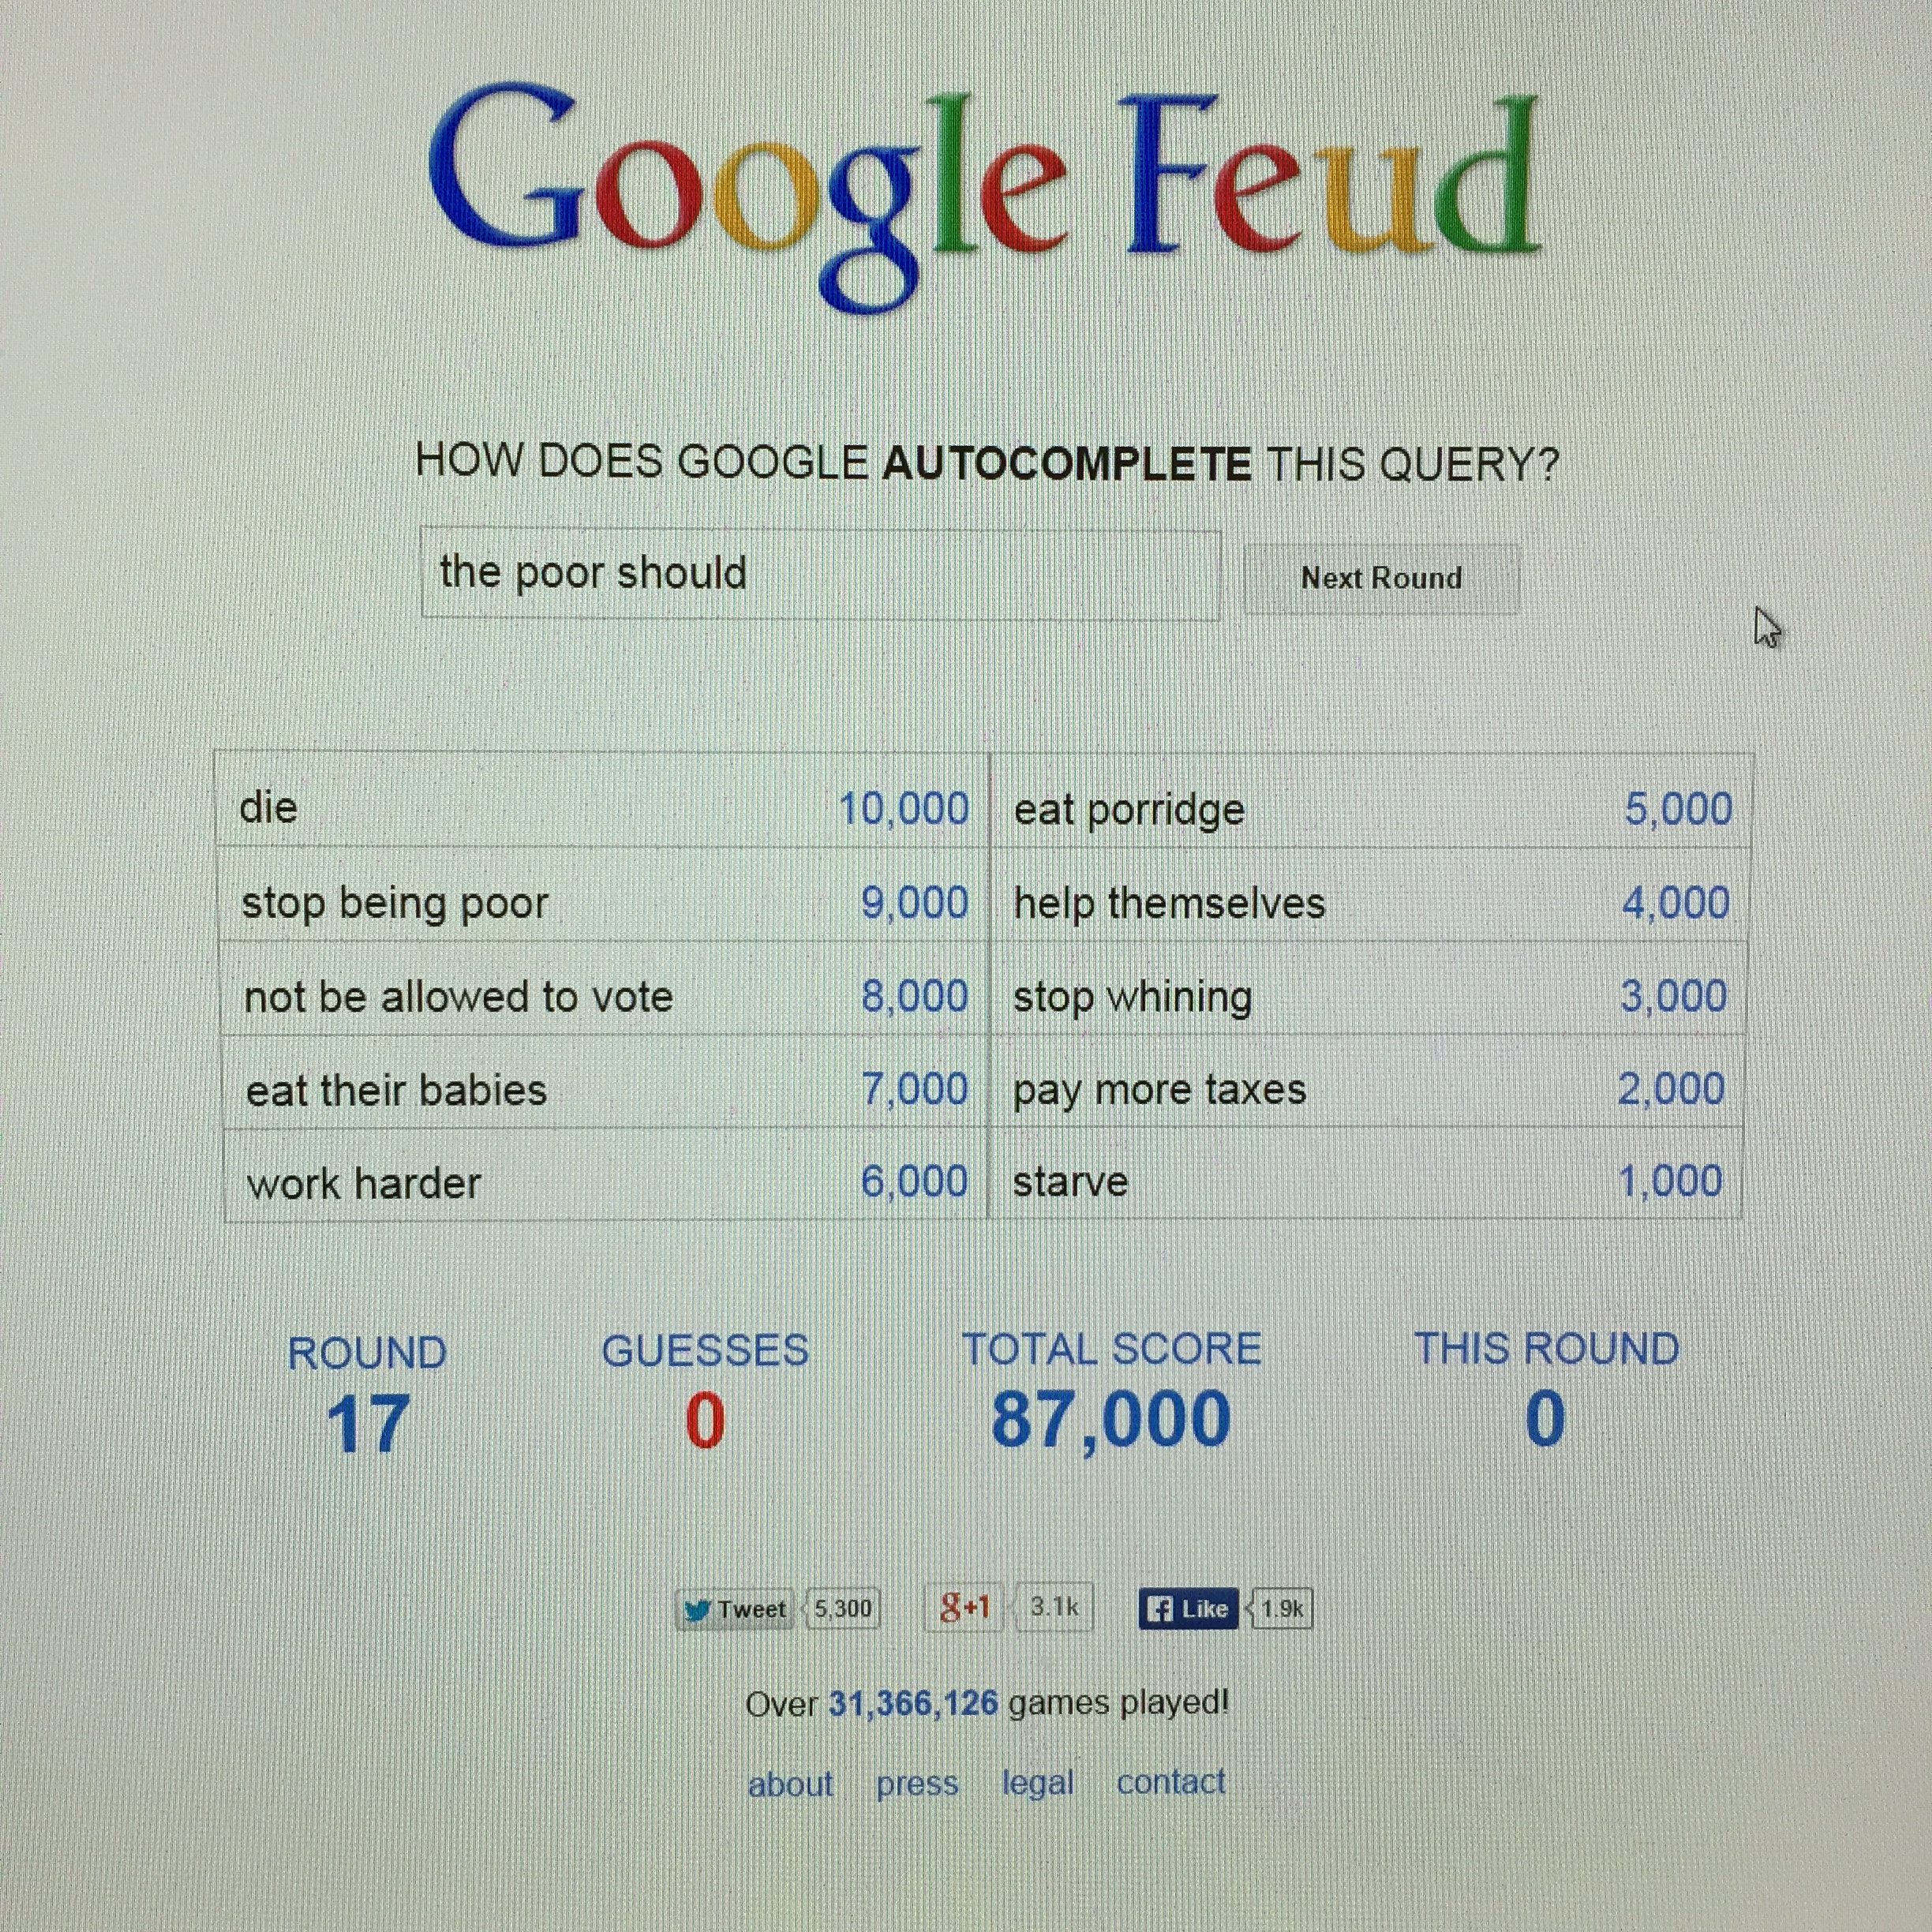 what does everyone think of these google feud answers?